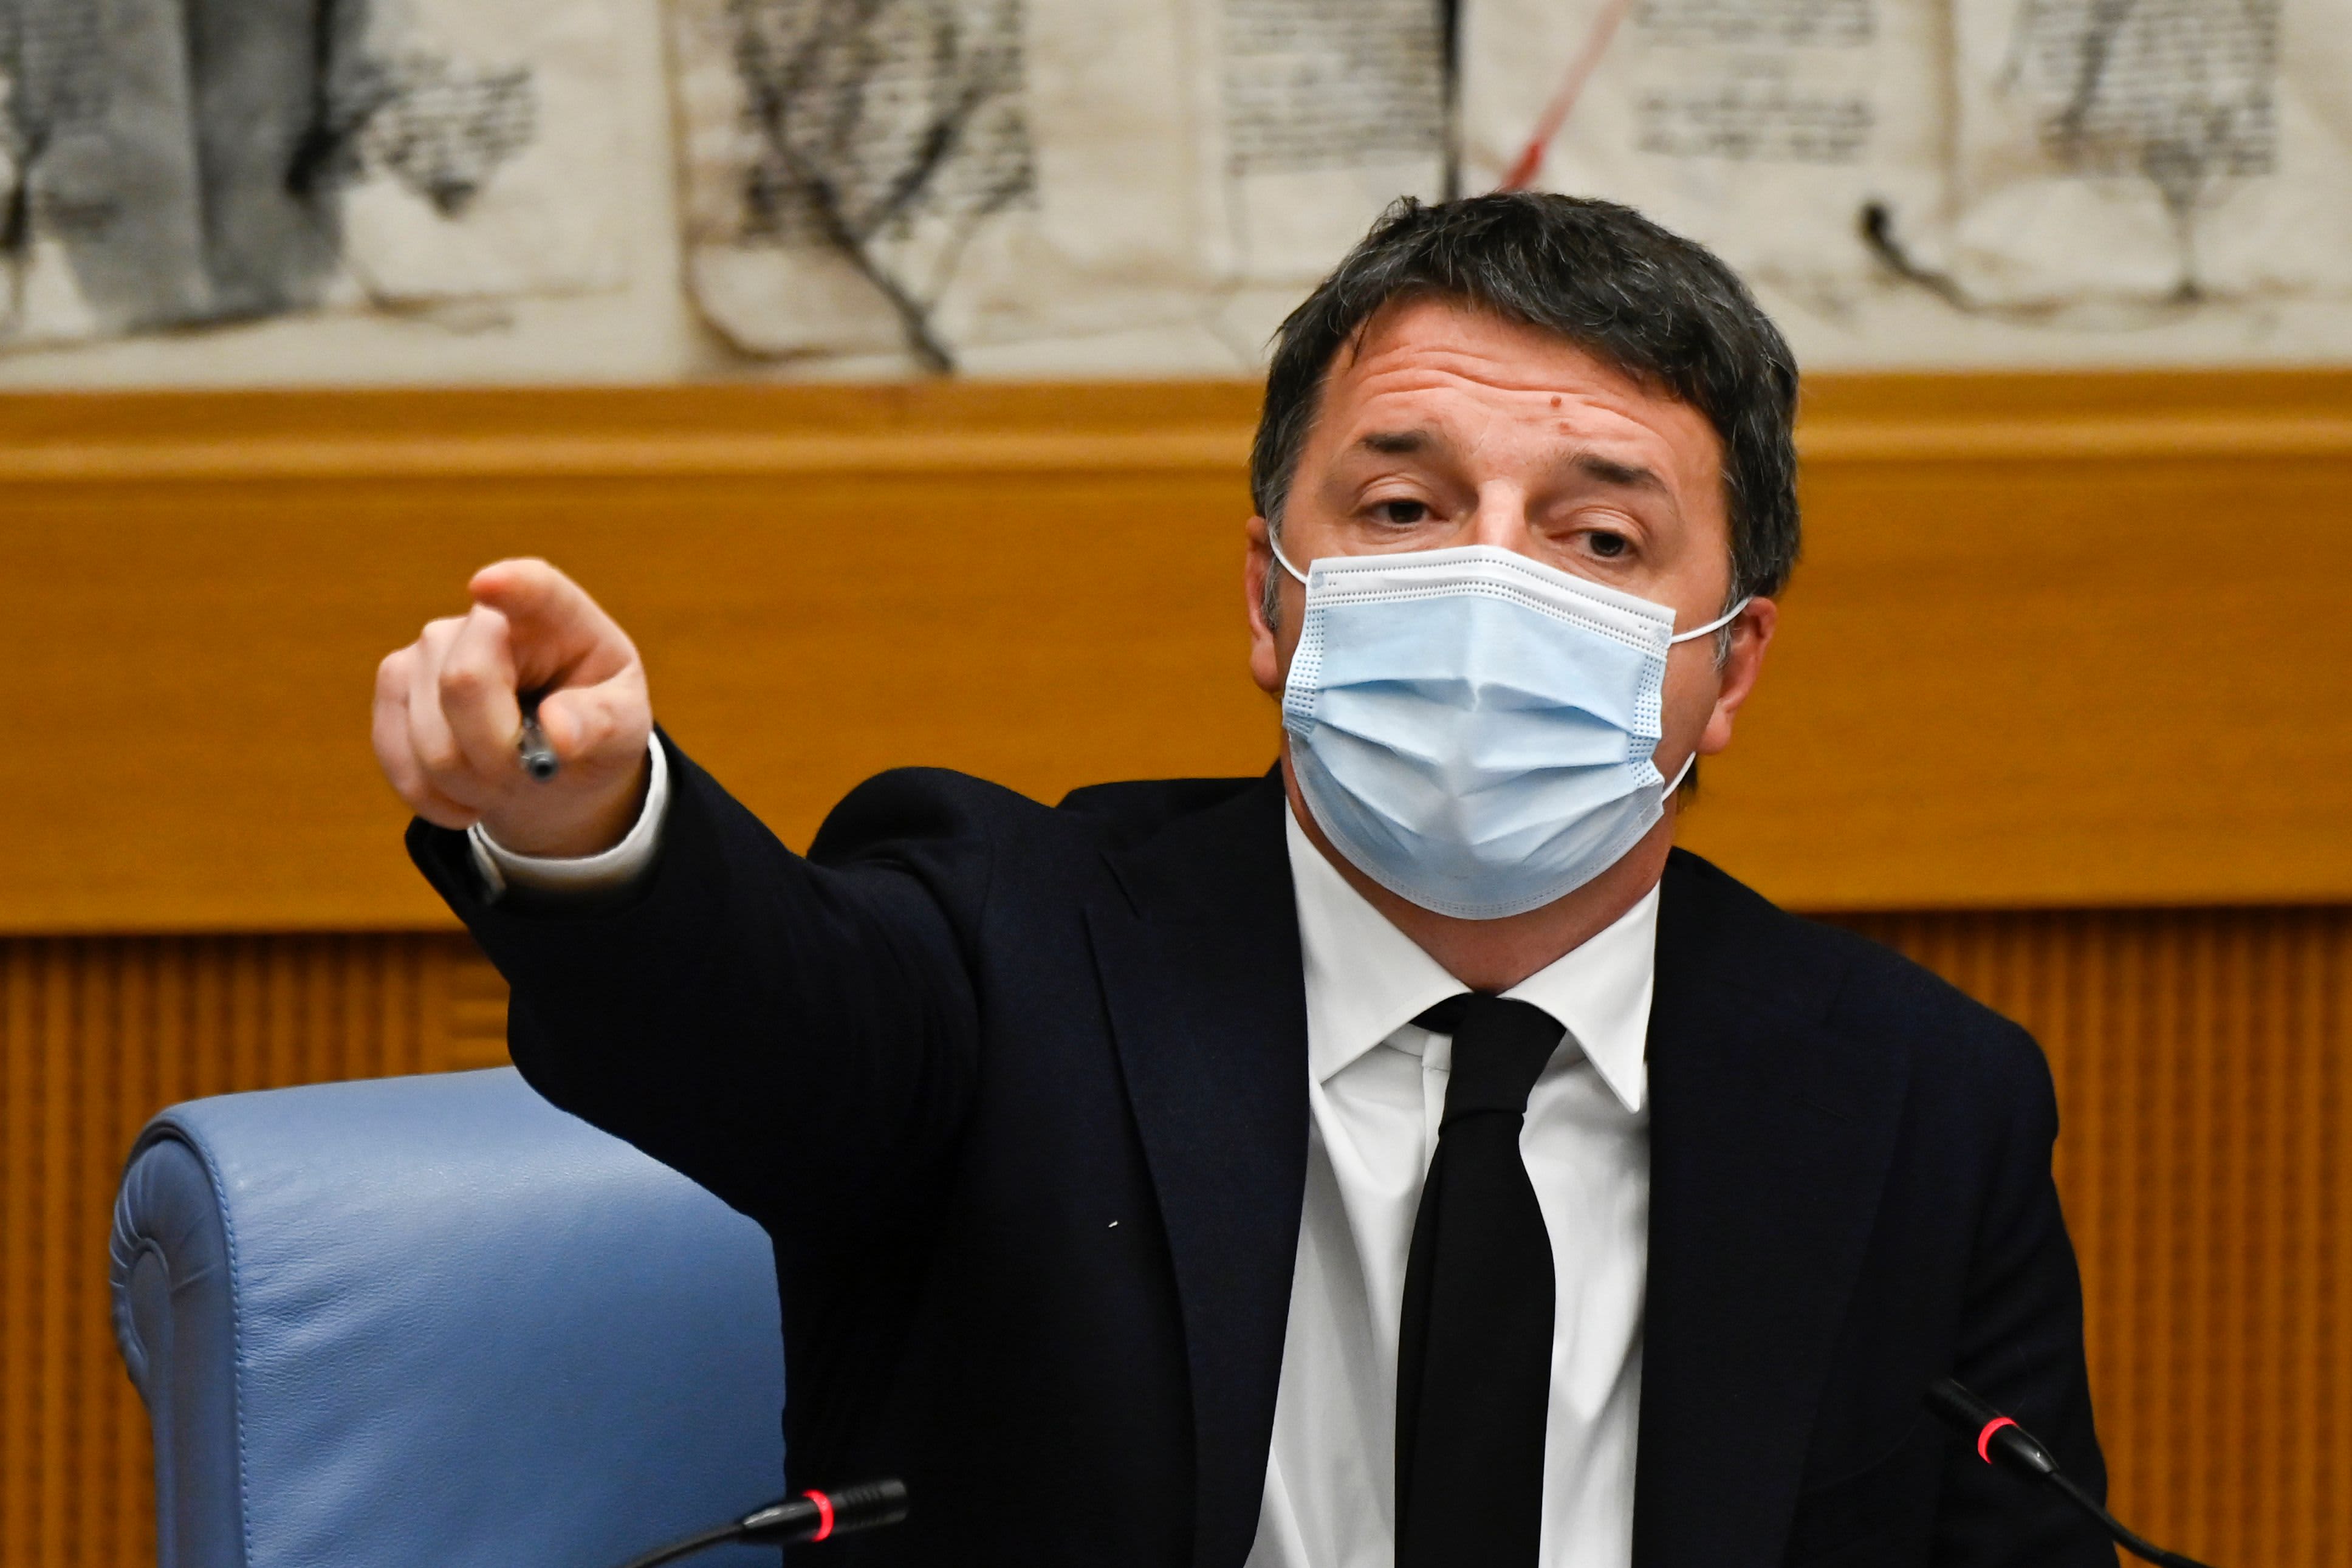 Renzi: Italy's government in crisis after former PM pulls support